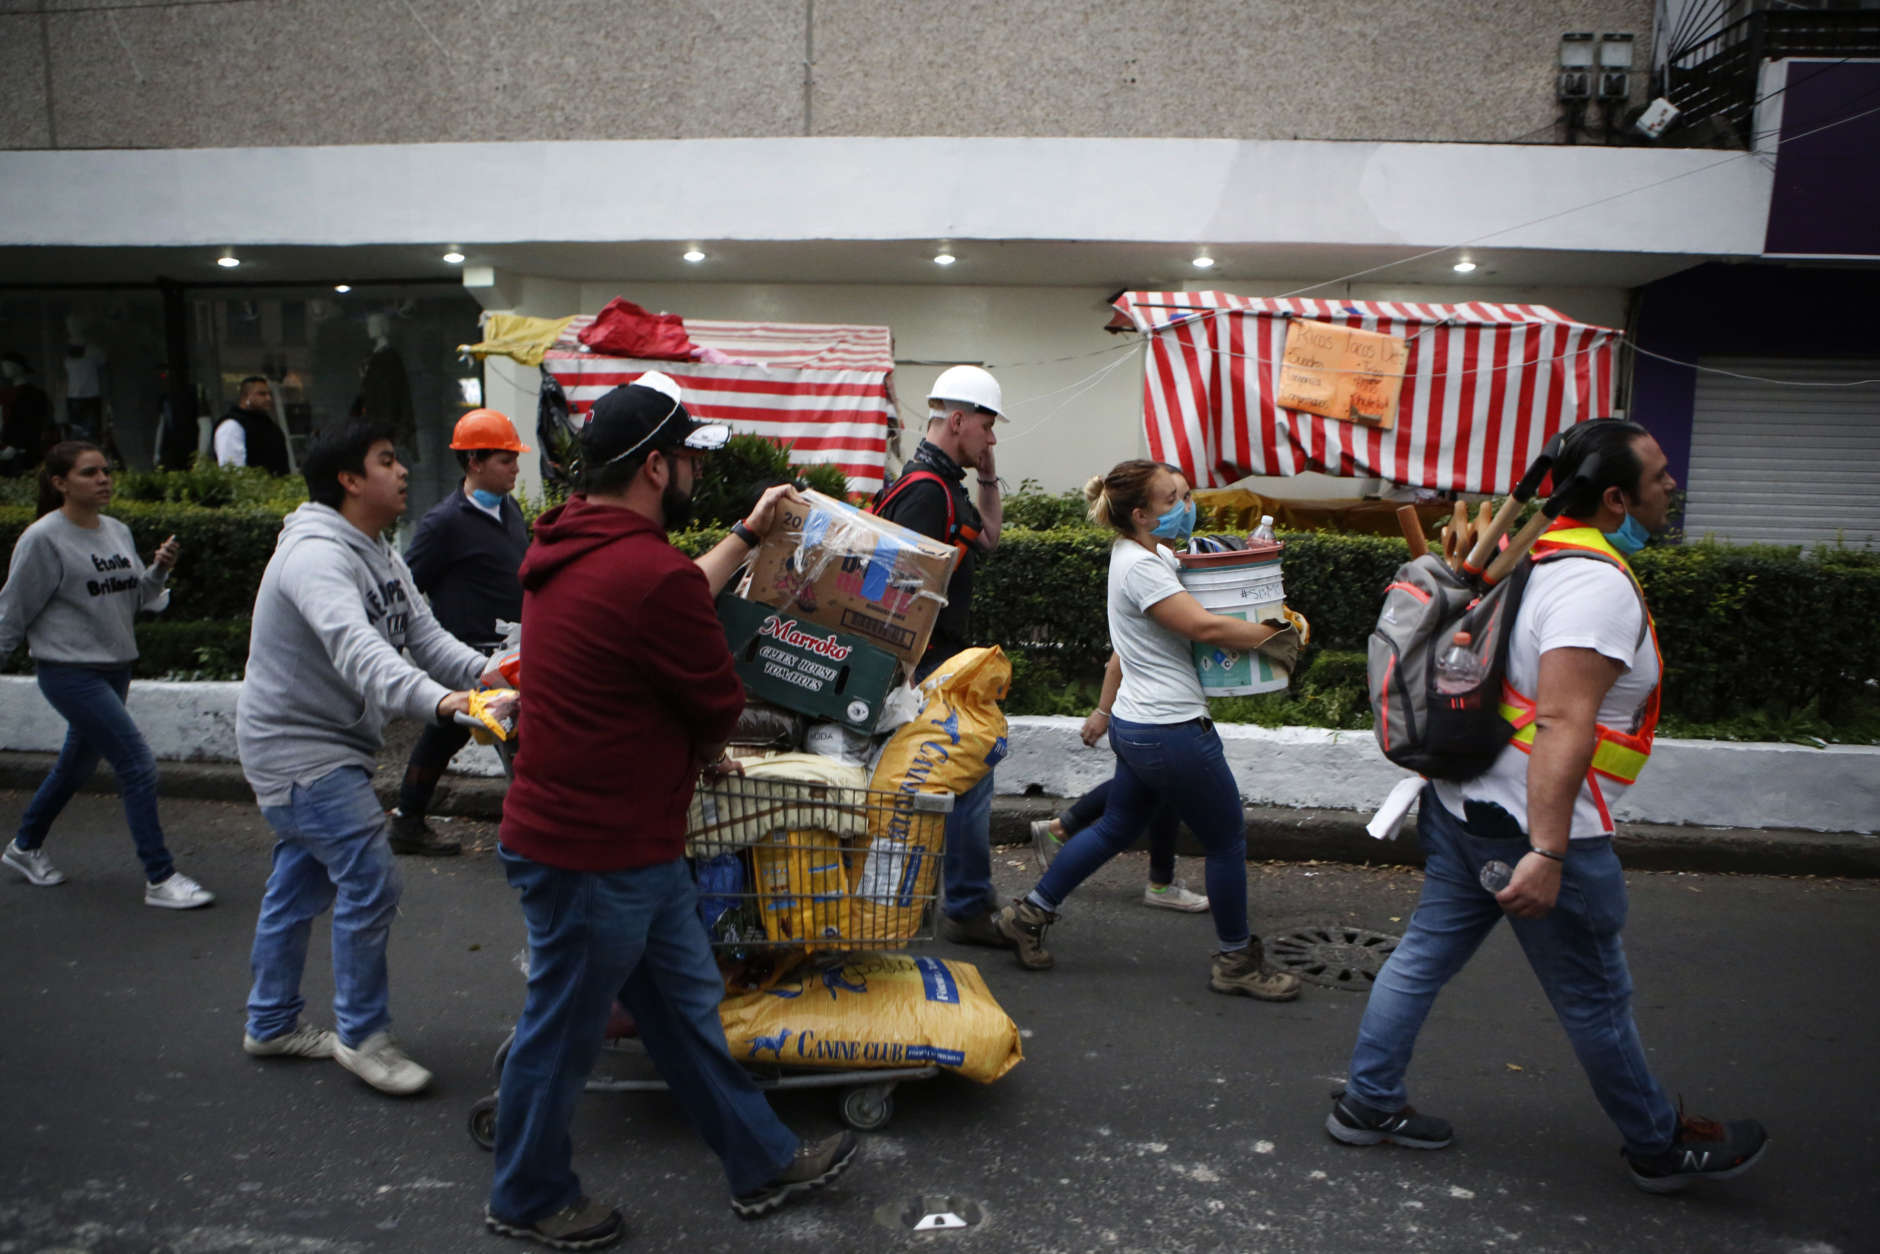 Volunteers offering their services at sites of earthquake damage mingle with people taking donations of pet food to a collection center, as they walk along Insurgentes Avenue in the Roma neighborhood in Mexico City, Wednesday, Sept. 20, 2017. City residents are roaming the streets looking for ways to help in the rescue and recovery effort, and thousands have participated in removing debris, organizing donations, directing traffic, and distributing food and water. (AP Photo/Rebecca Blackwell)